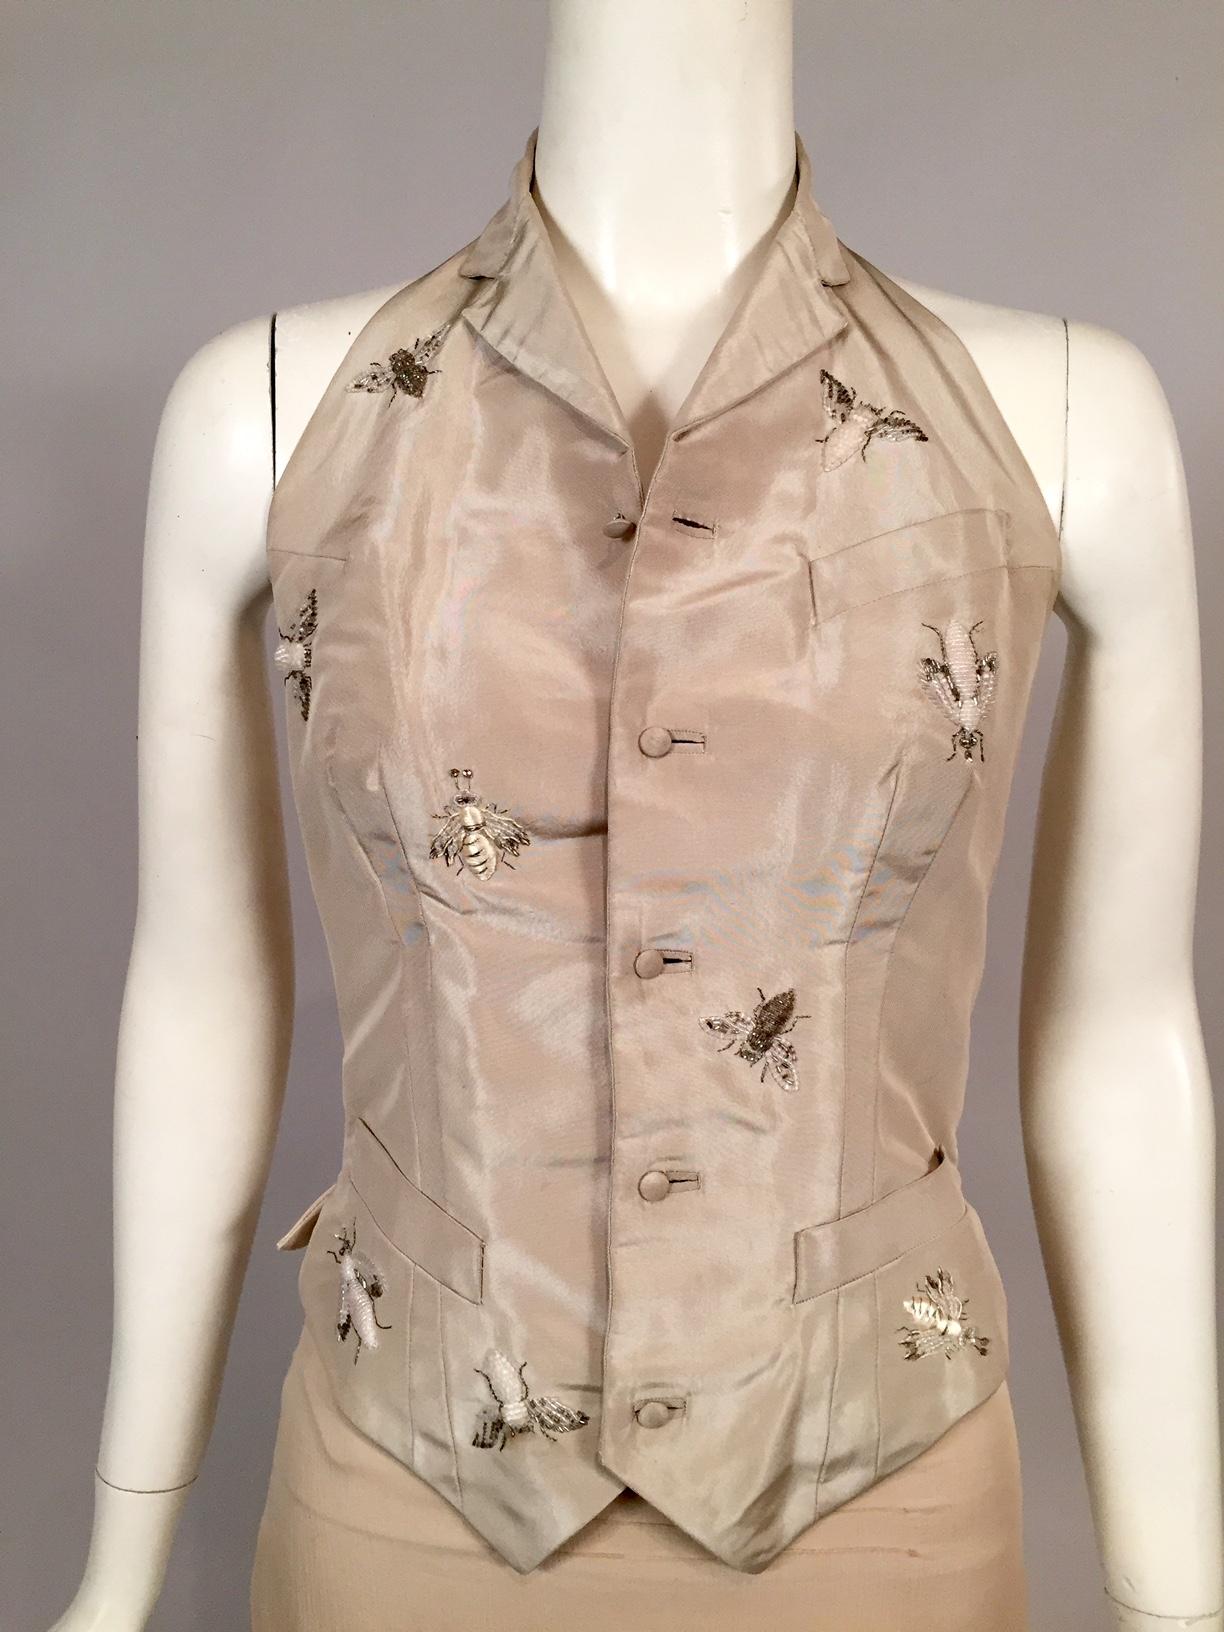 The Lesage Paris atelier used silver and white beads and cream silk and silver metallic threads to create the honey bees on this silk taffeta vest from Maggie Norris Couture. Documentation can be found on the designers website and Instagram account.